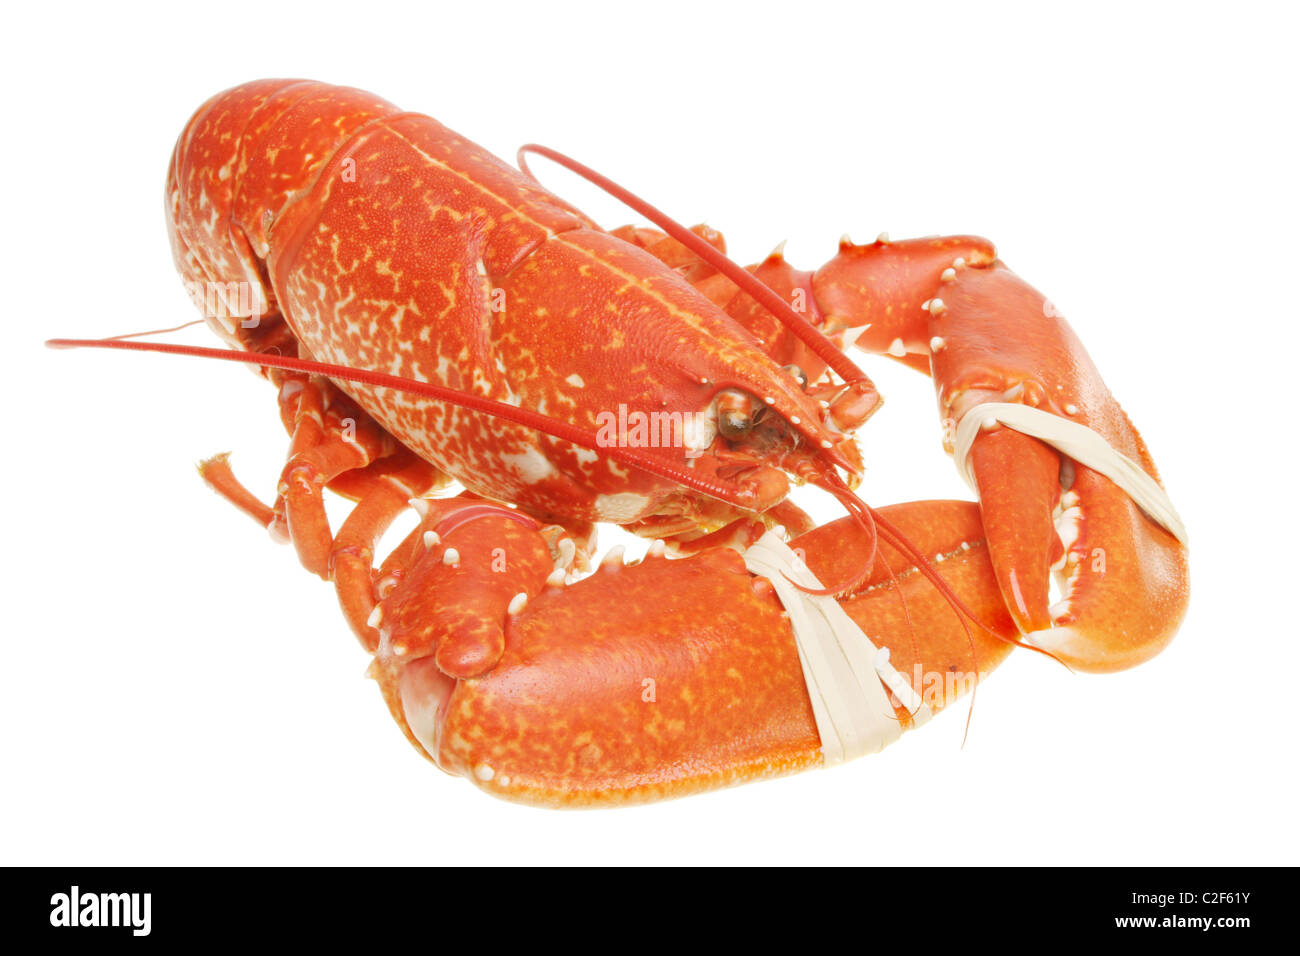 Whole cooked lobster isolated on white Stock Photo